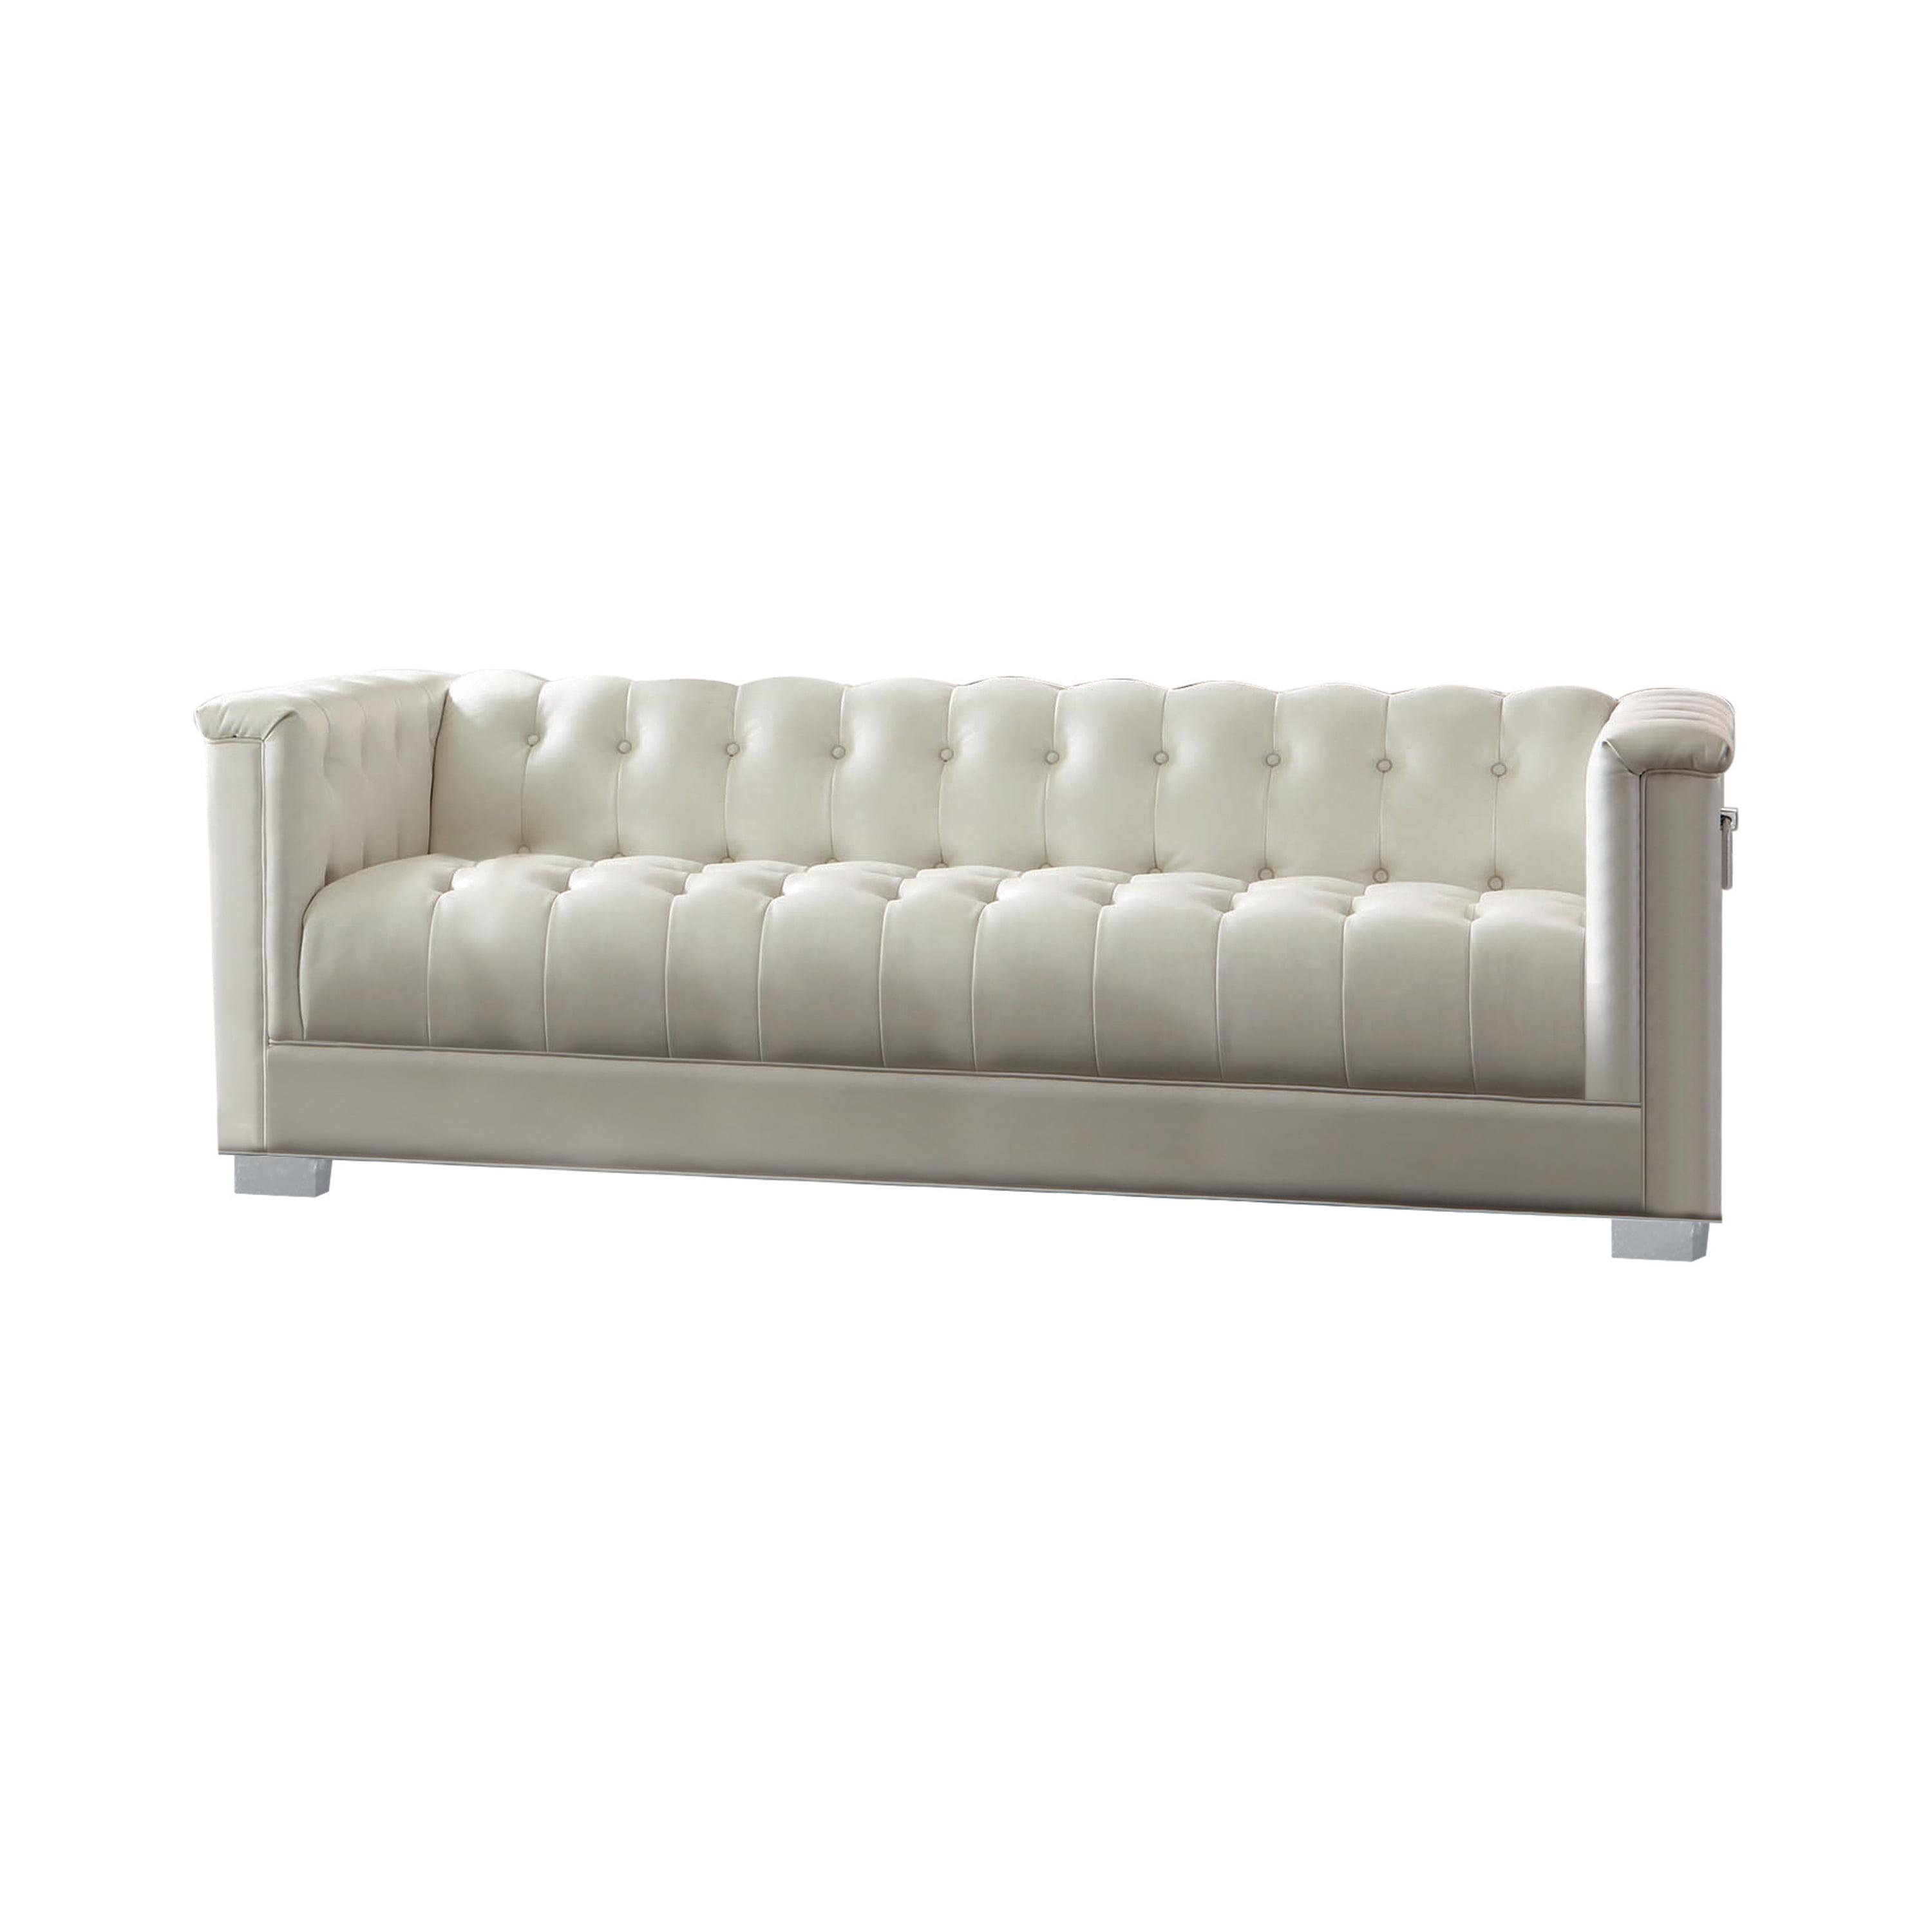 Contemporary Chaviano Pearl White Tufted Faux Leather Sofa with Chrome Accents